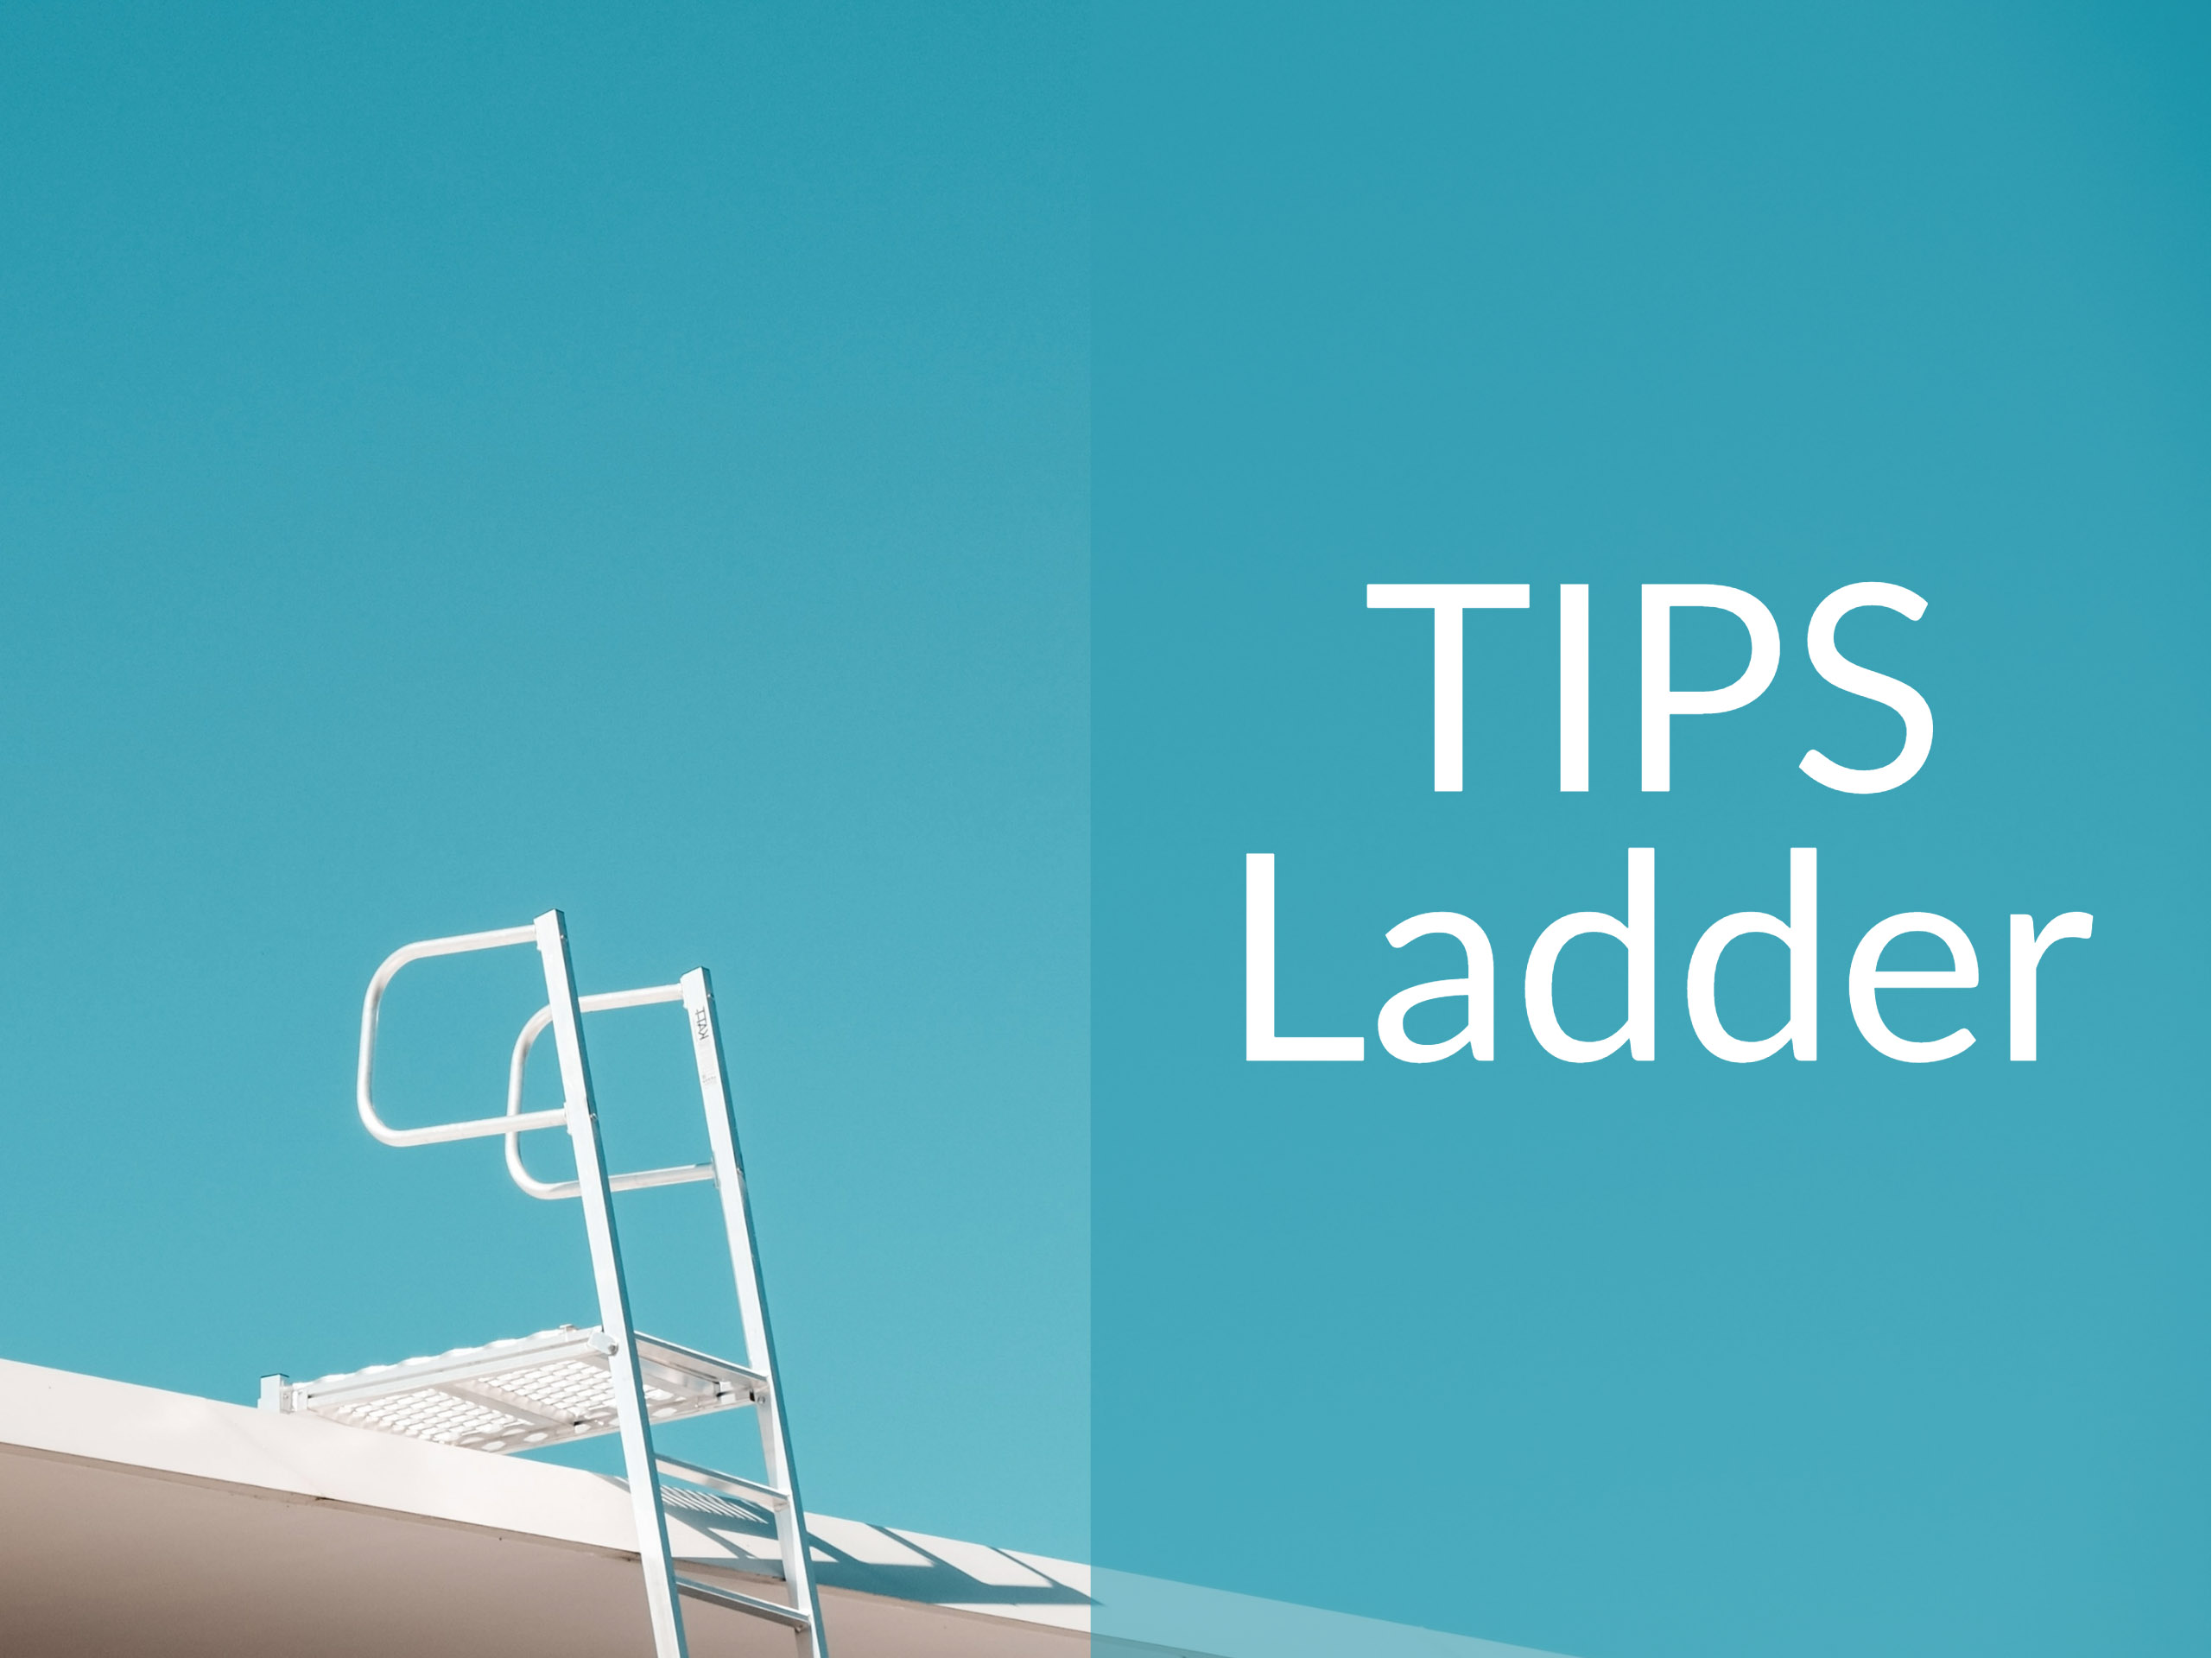 Ladder going up to a roof with the caption "TIPS Ladder"